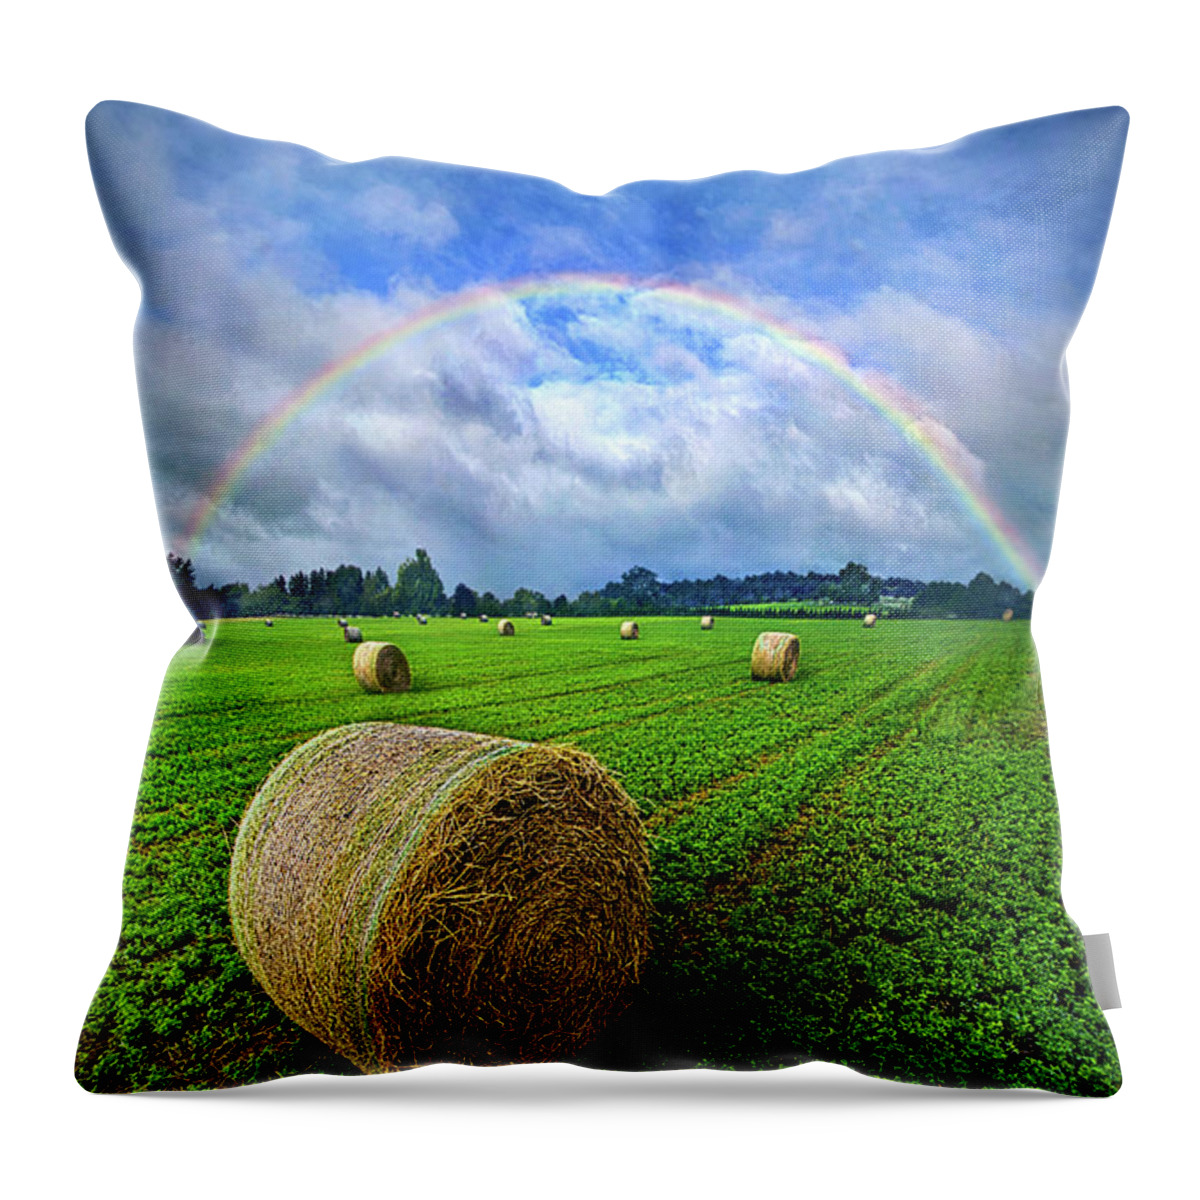 Environment Throw Pillow featuring the photograph Of The Light So Pure And True by Phil Koch